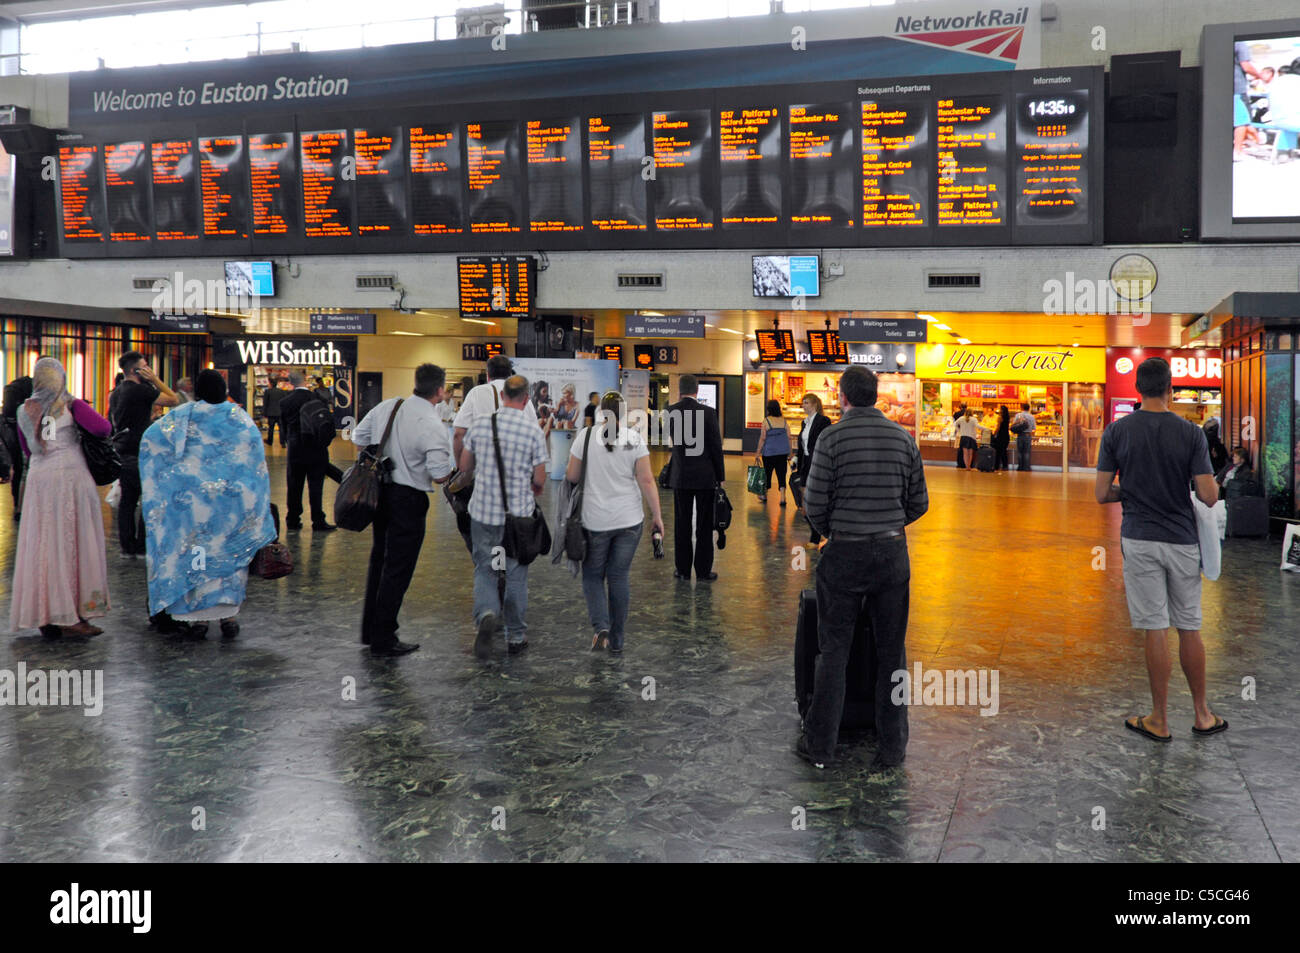 Euston railway train station concourse back view travellers viewing train departure information board shops beyond London England UK Stock Photo